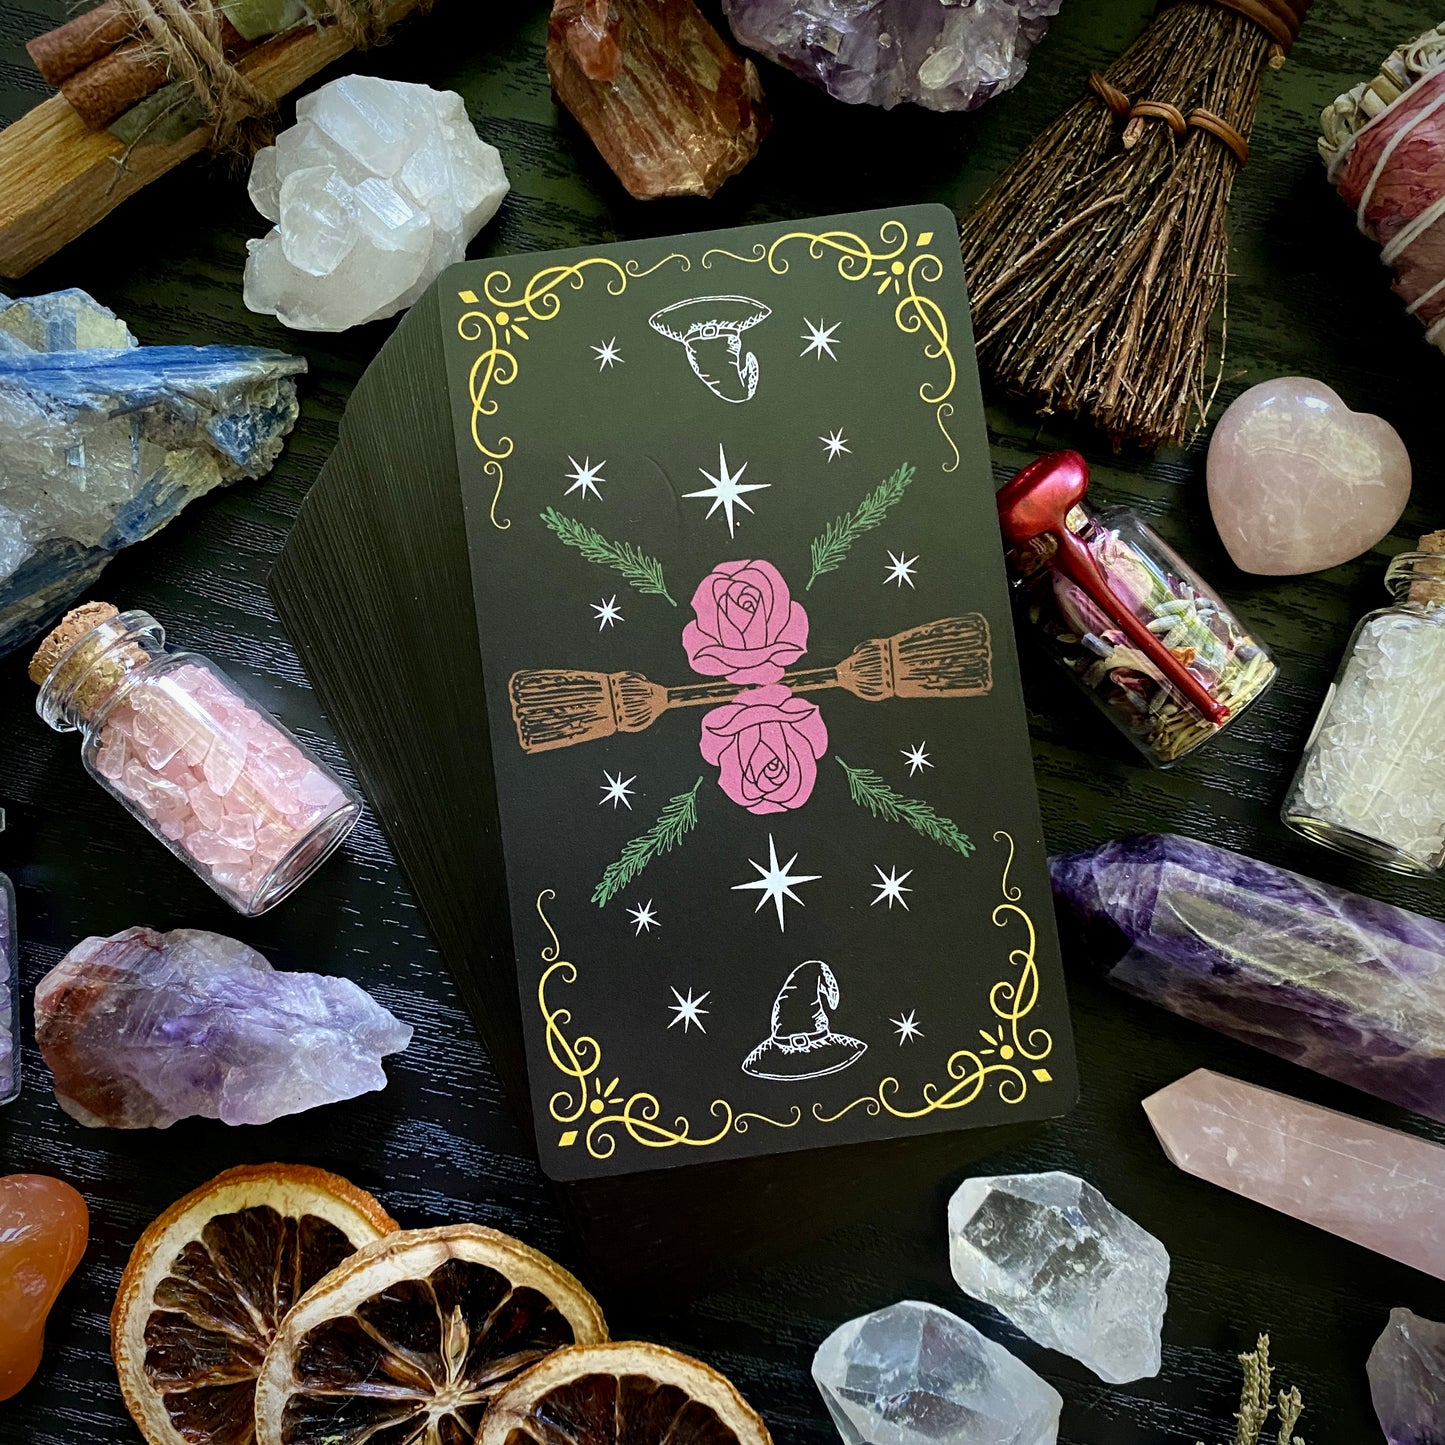 Practical Magic : Inner Witch Oracle Deck (2nd Edtion)